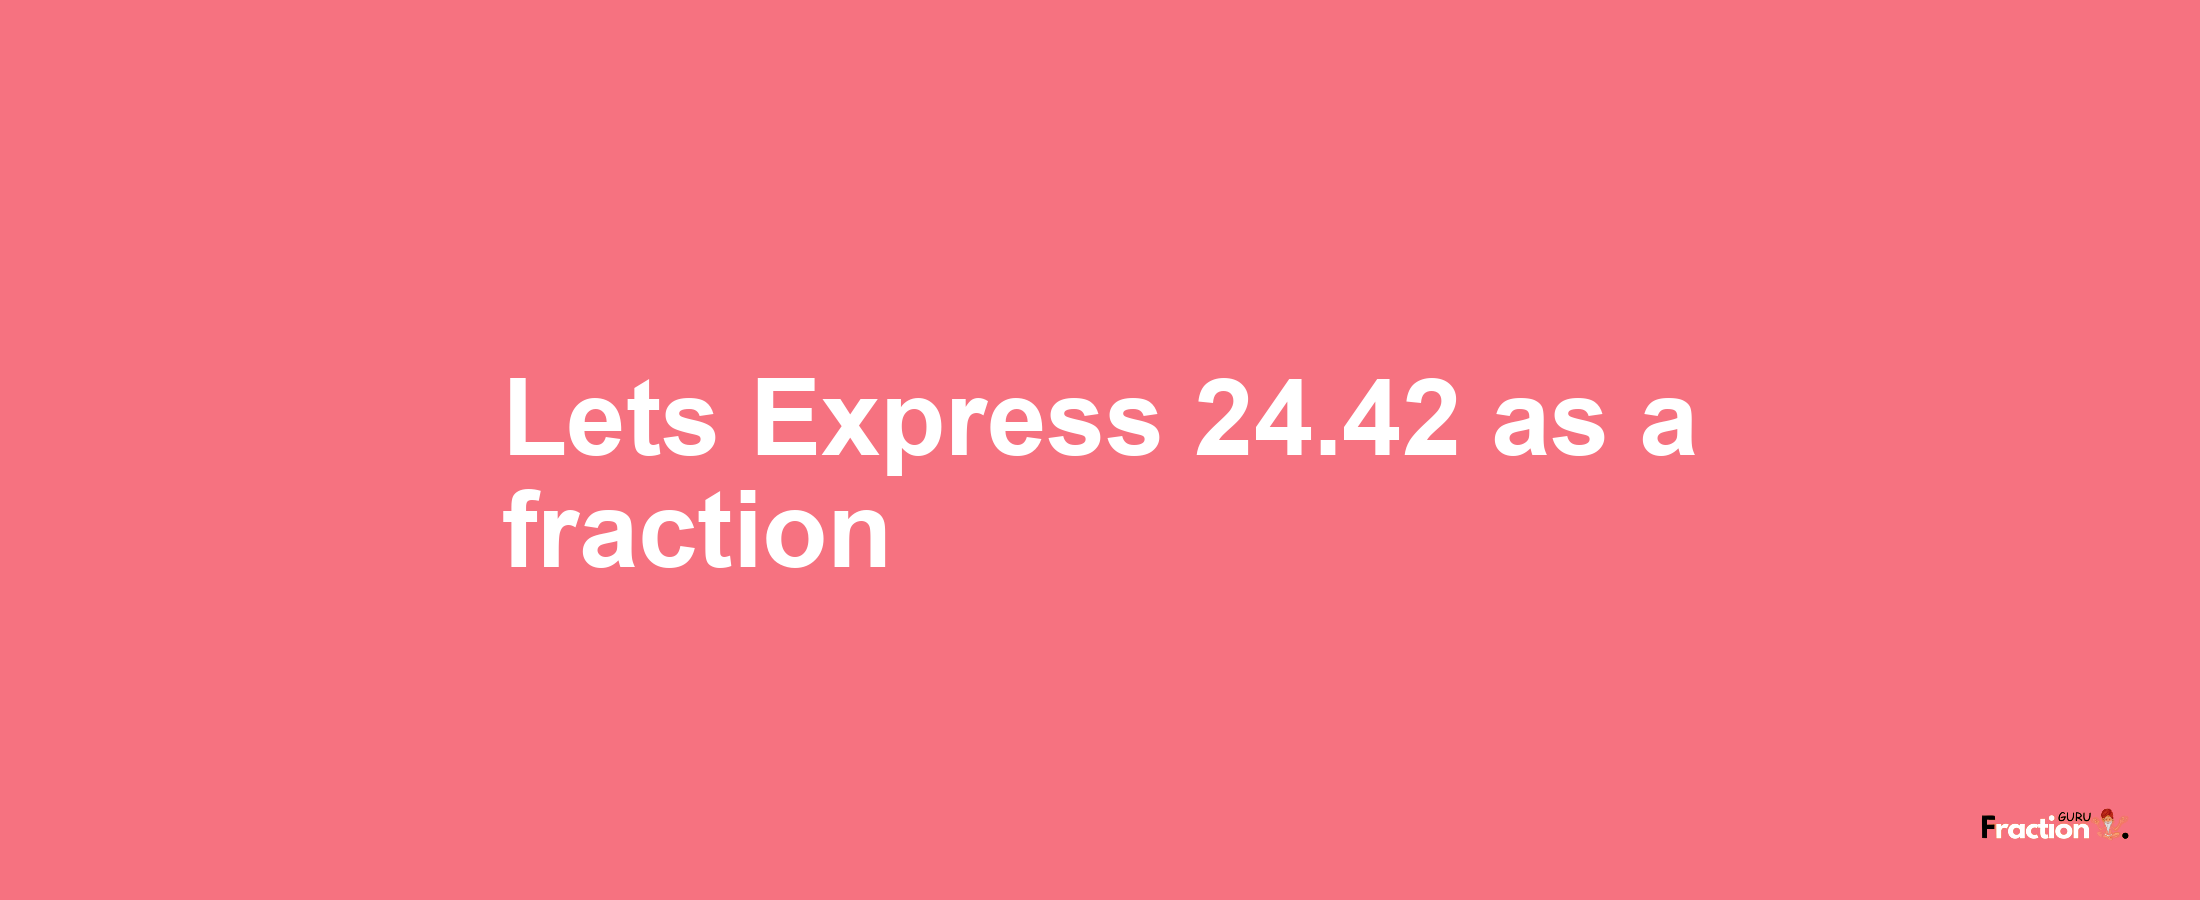 Lets Express 24.42 as afraction